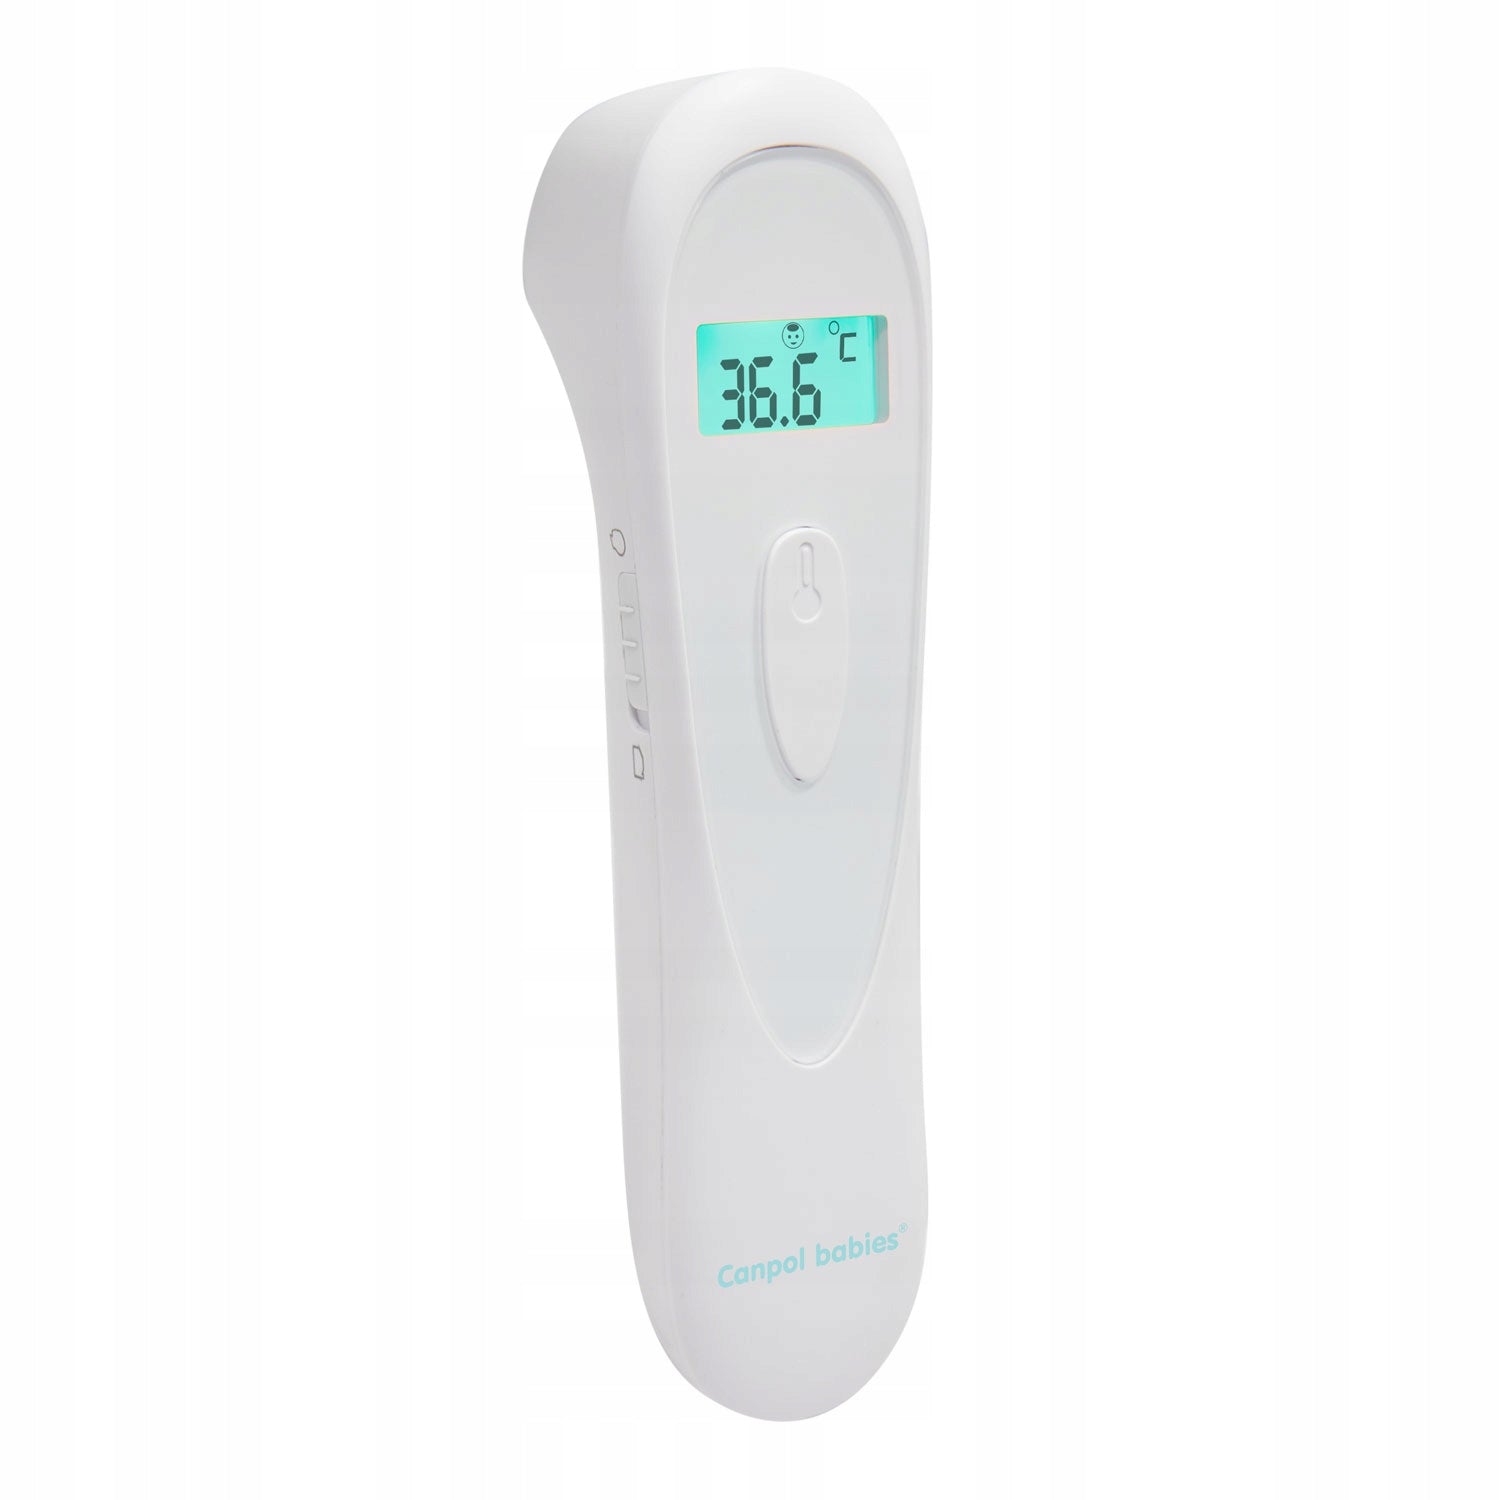 Canpol Babies: Easystart infrared contactless infrared thermometer